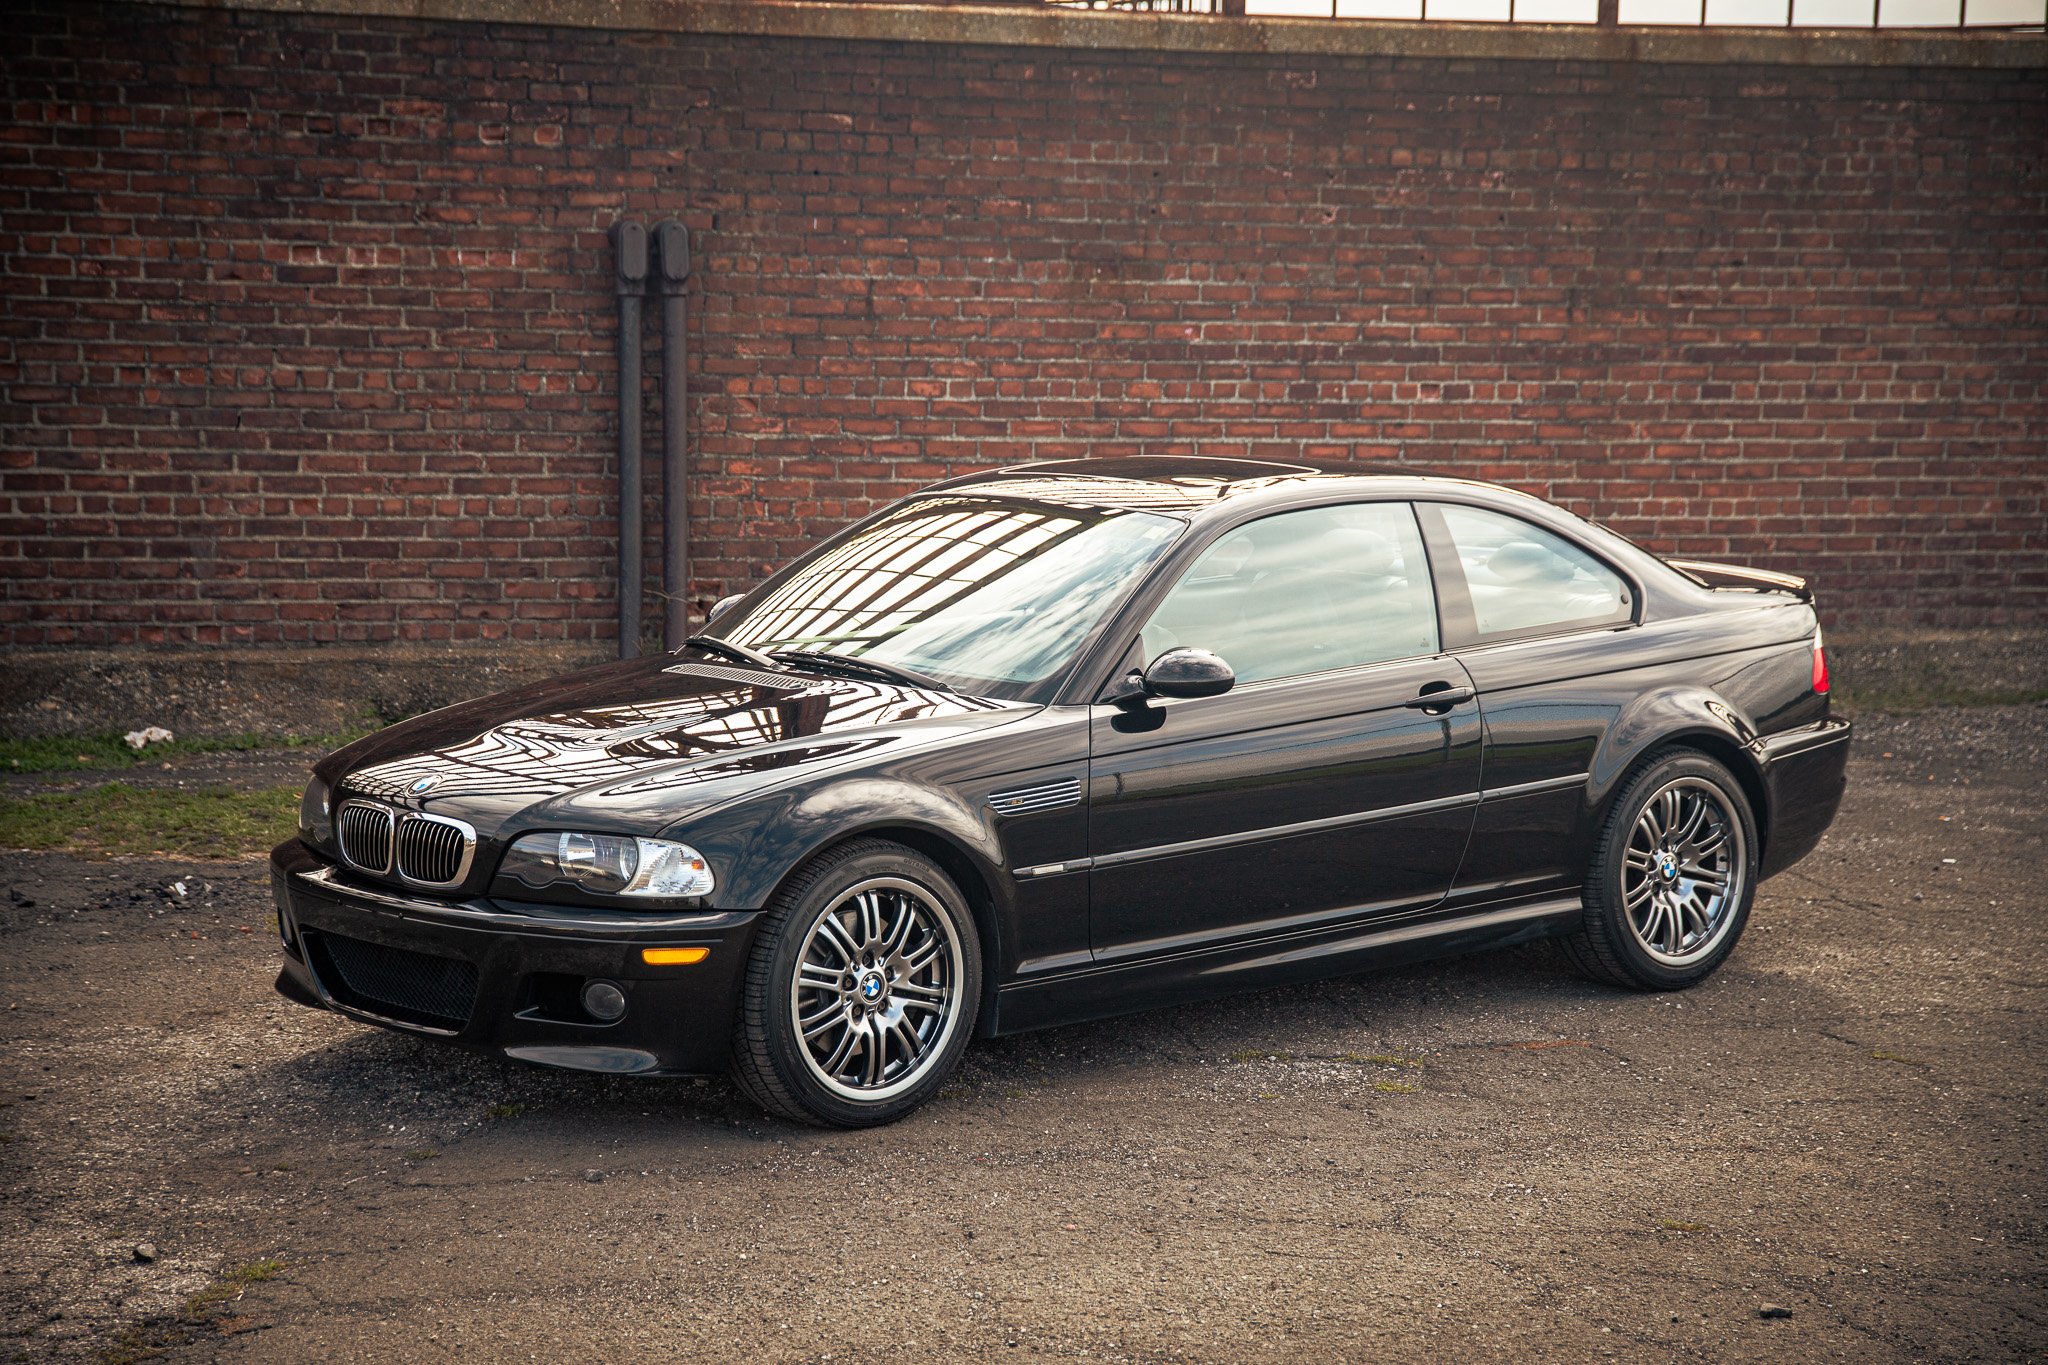 SOLD - 2001 BMW M3 Coupe For Sale  Automotive Restorations, Inc. —  Automotive Restorations, Inc.